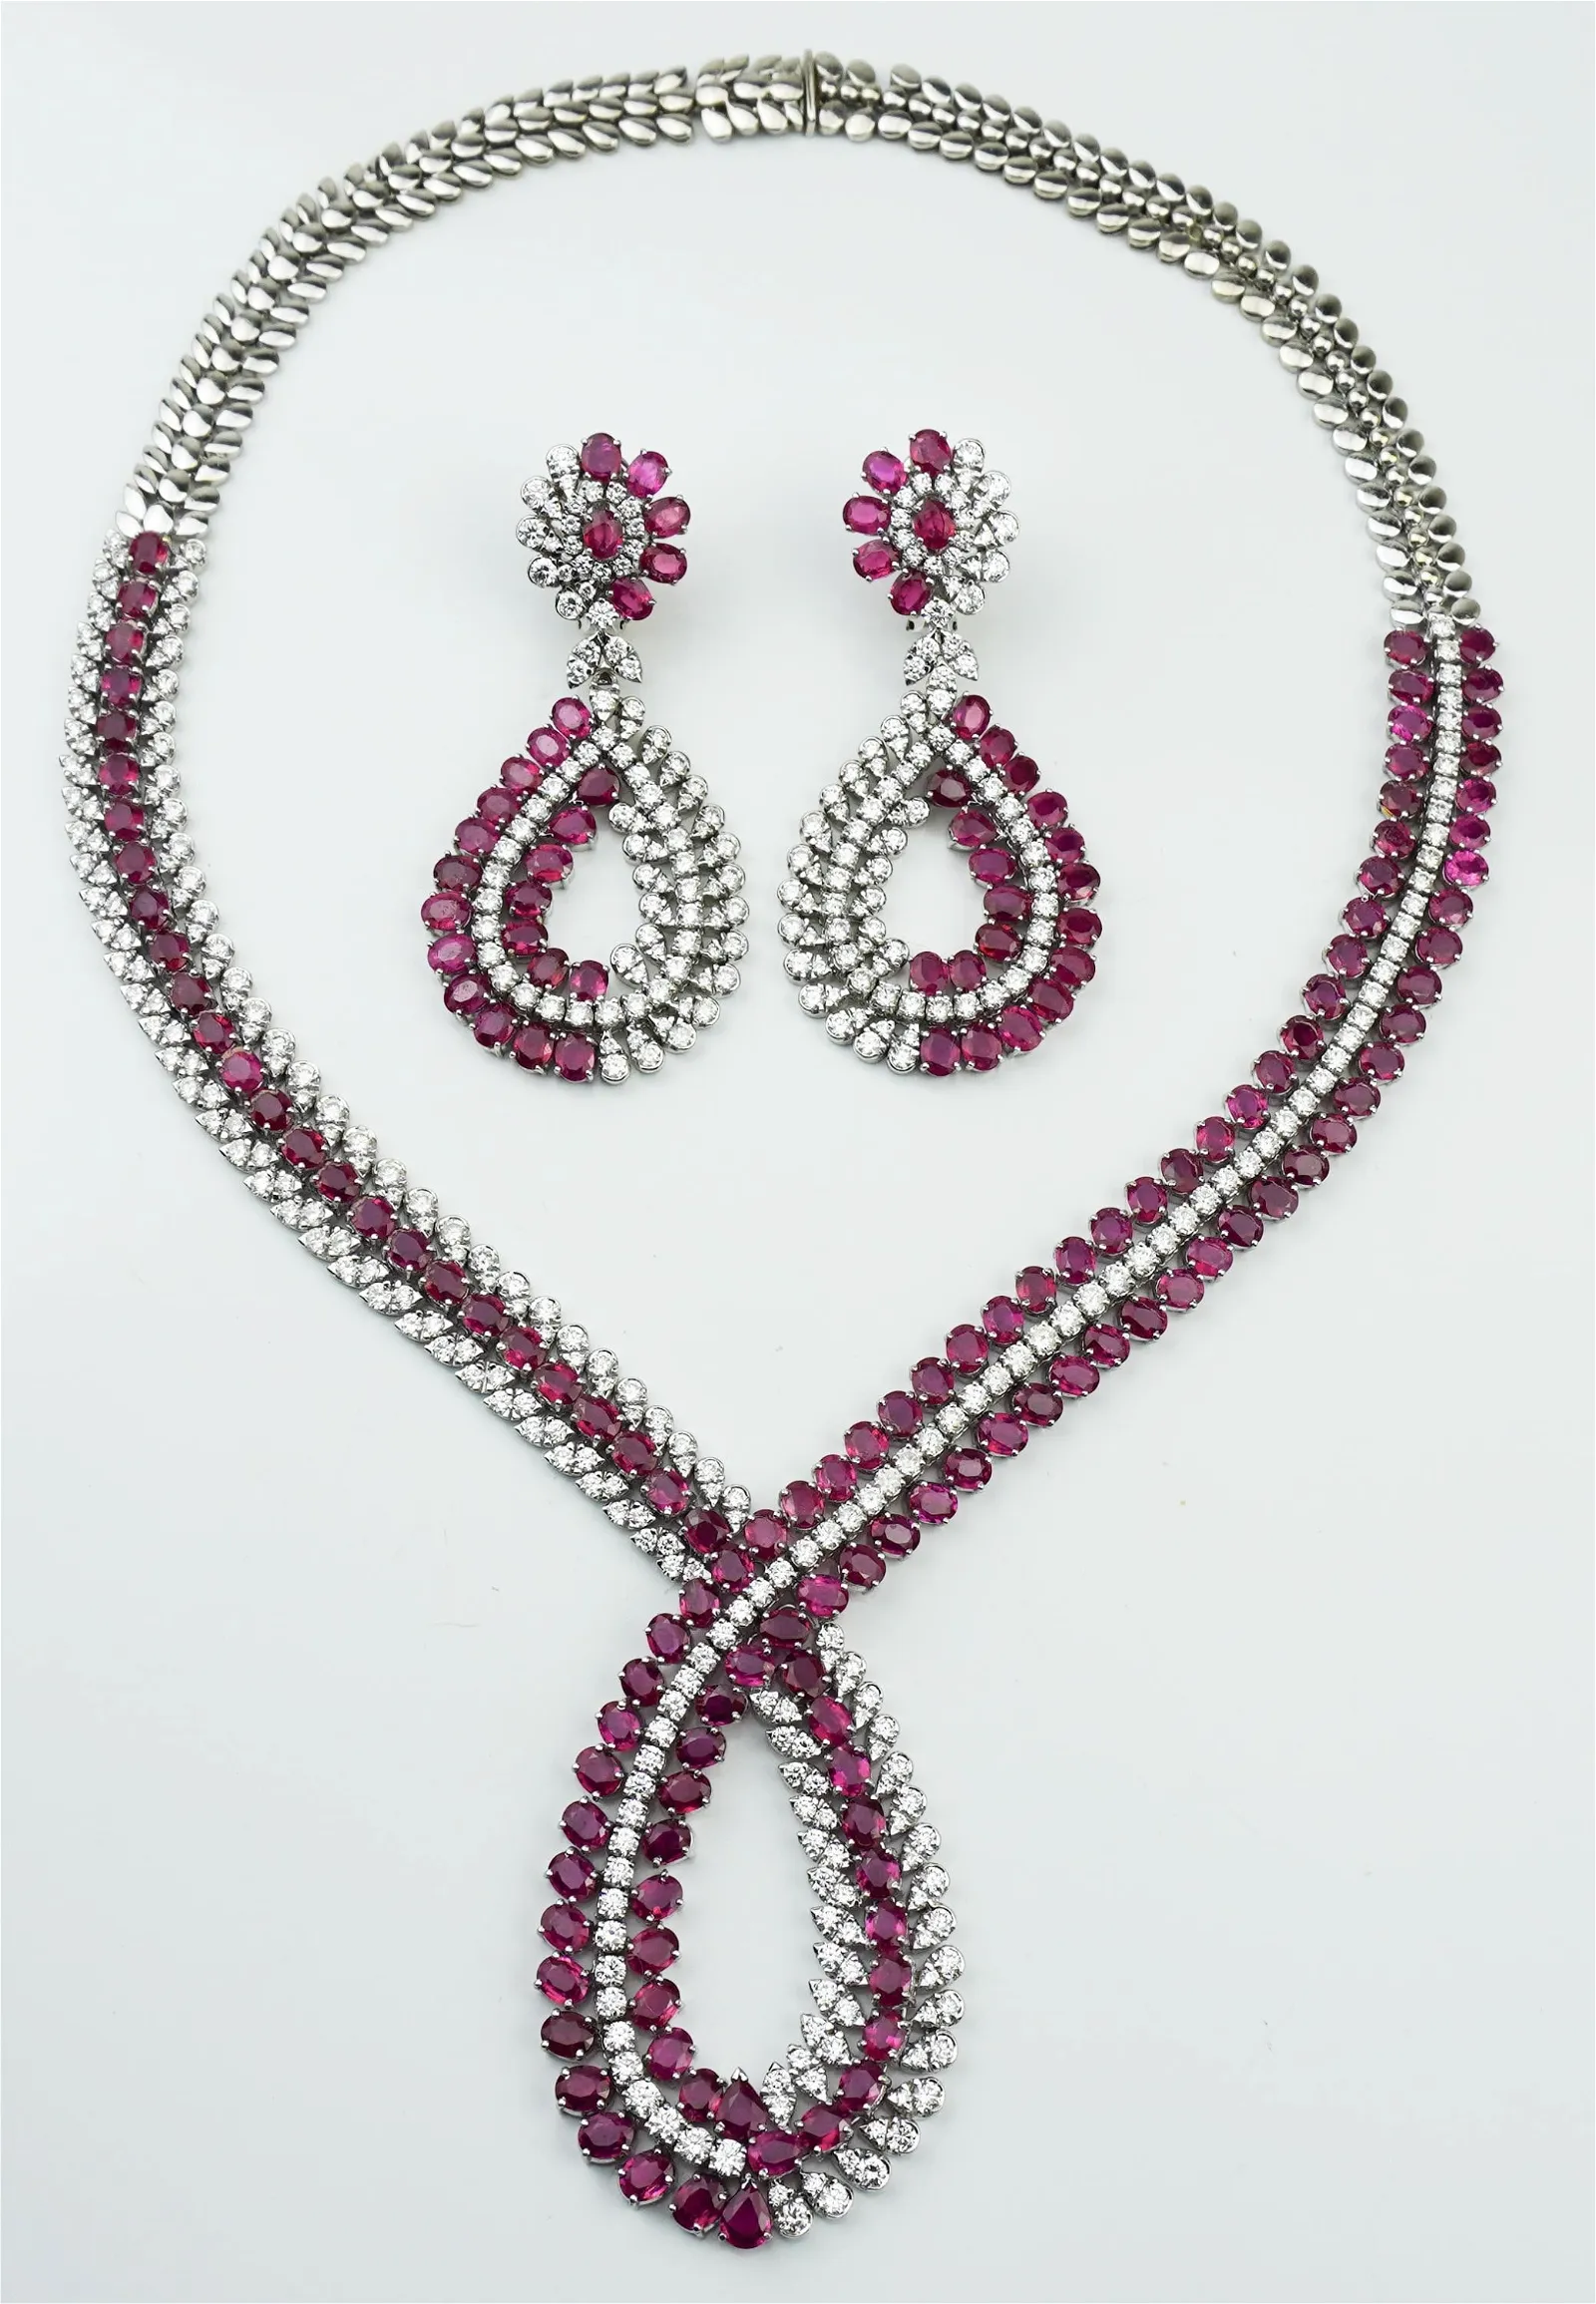 18K white gold ruby and diamond necklace and earrings suite in overlapping leaf (or petal-style) motif. Total weight of diamonds in necklace is 19.0 carats with rubies totaling 30.0 carats. Earrings: 6.46 carats of diamonds; 12.0 carats of rubies, with each earring clip having an additional pear-shape faceted ruby weighing approximately .45 carats. Suite presented in custom-fitted box. Estimate: $13,000-$15,000